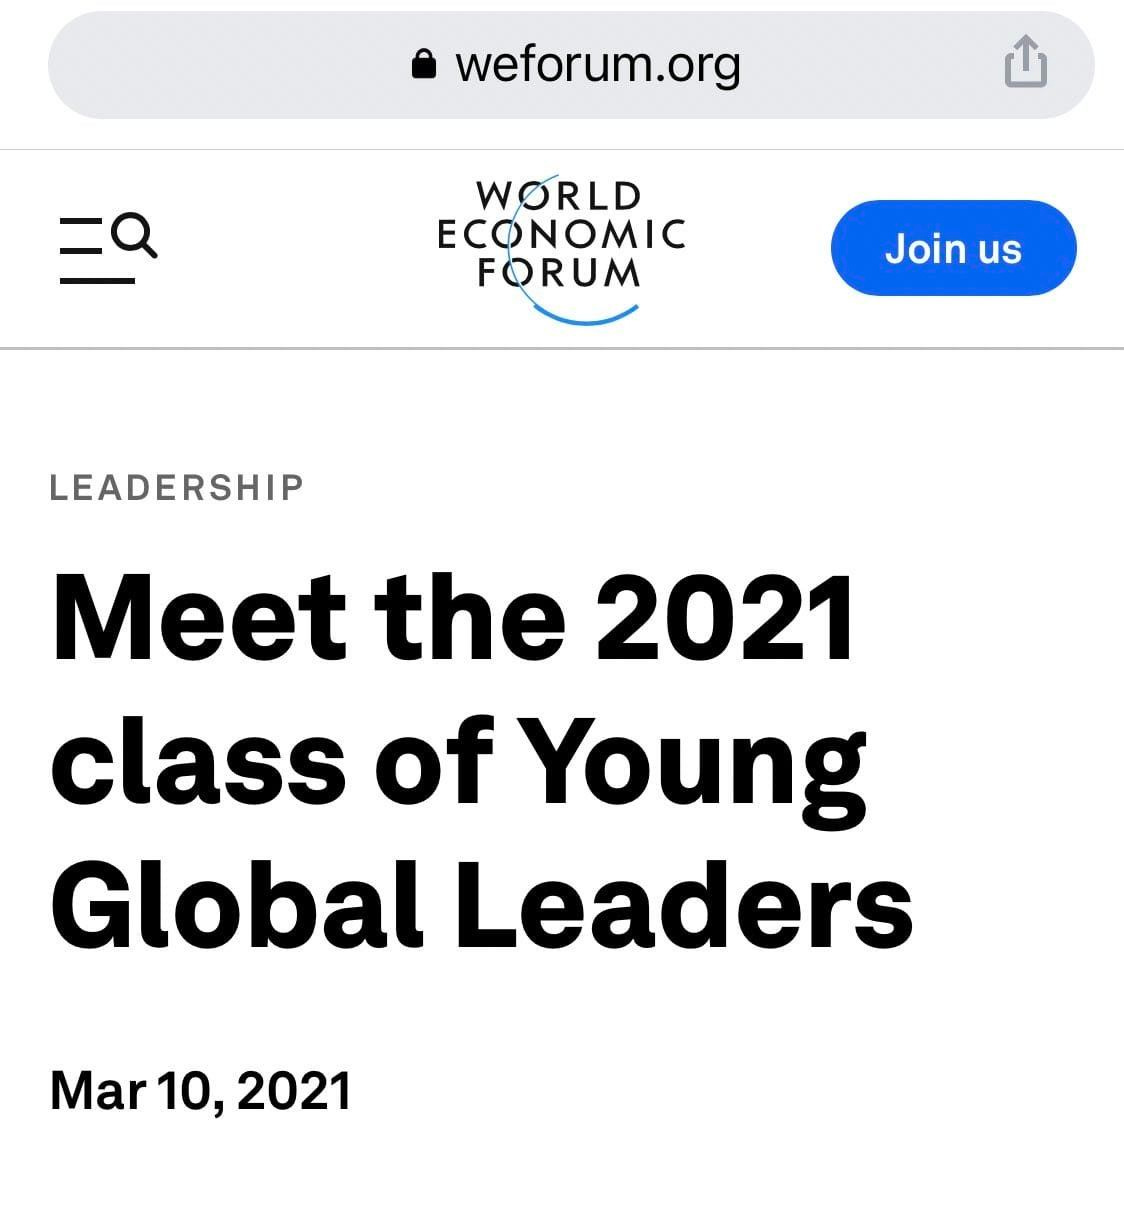 May be an image of text that says 'weforum.org WORLD ECONOMIC FORUM Join us LEADERSHIP Meet the 2021 class of Young Global Leaders Mar 10, 2021'